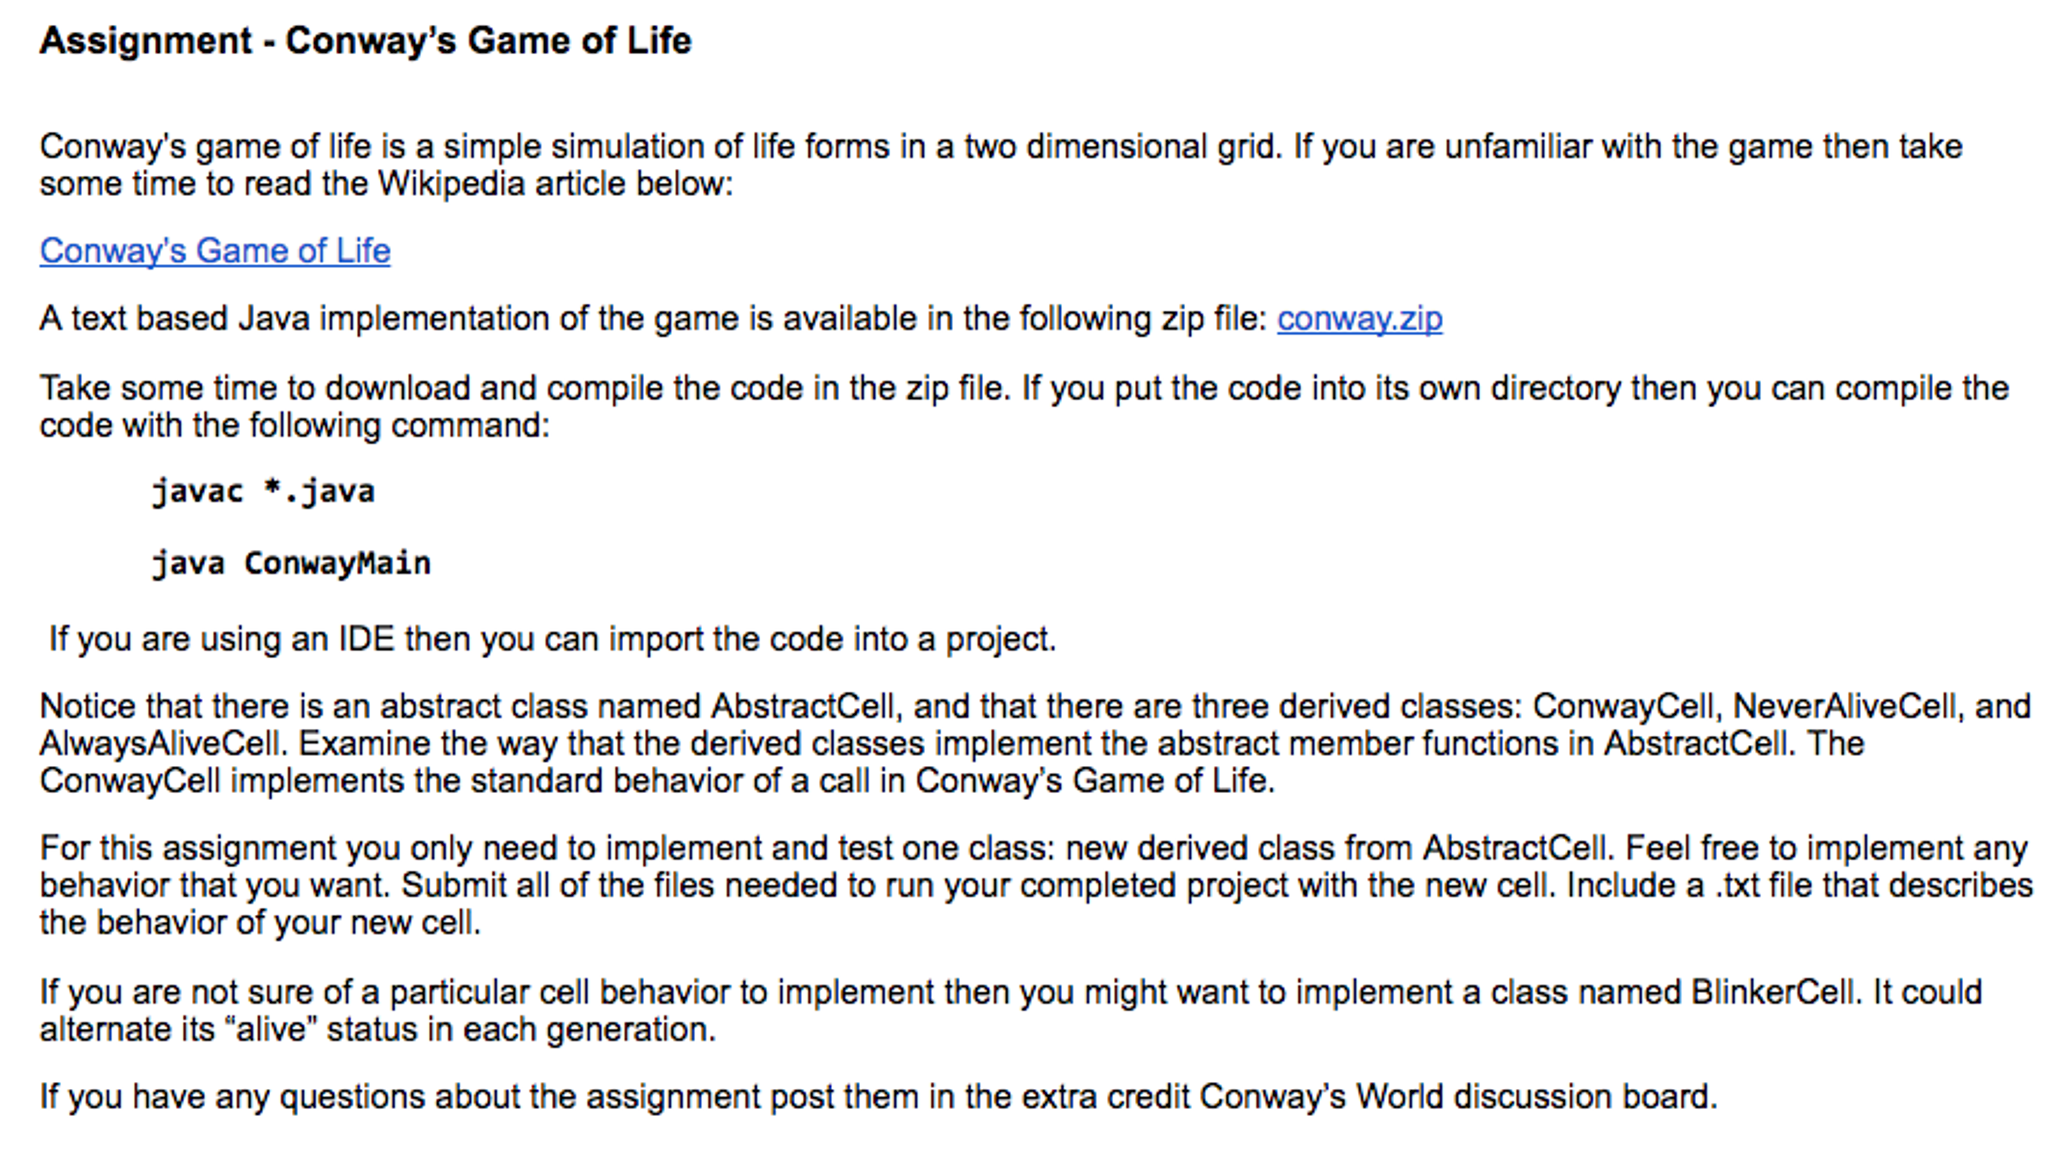 The Game of Life - Wikipedia